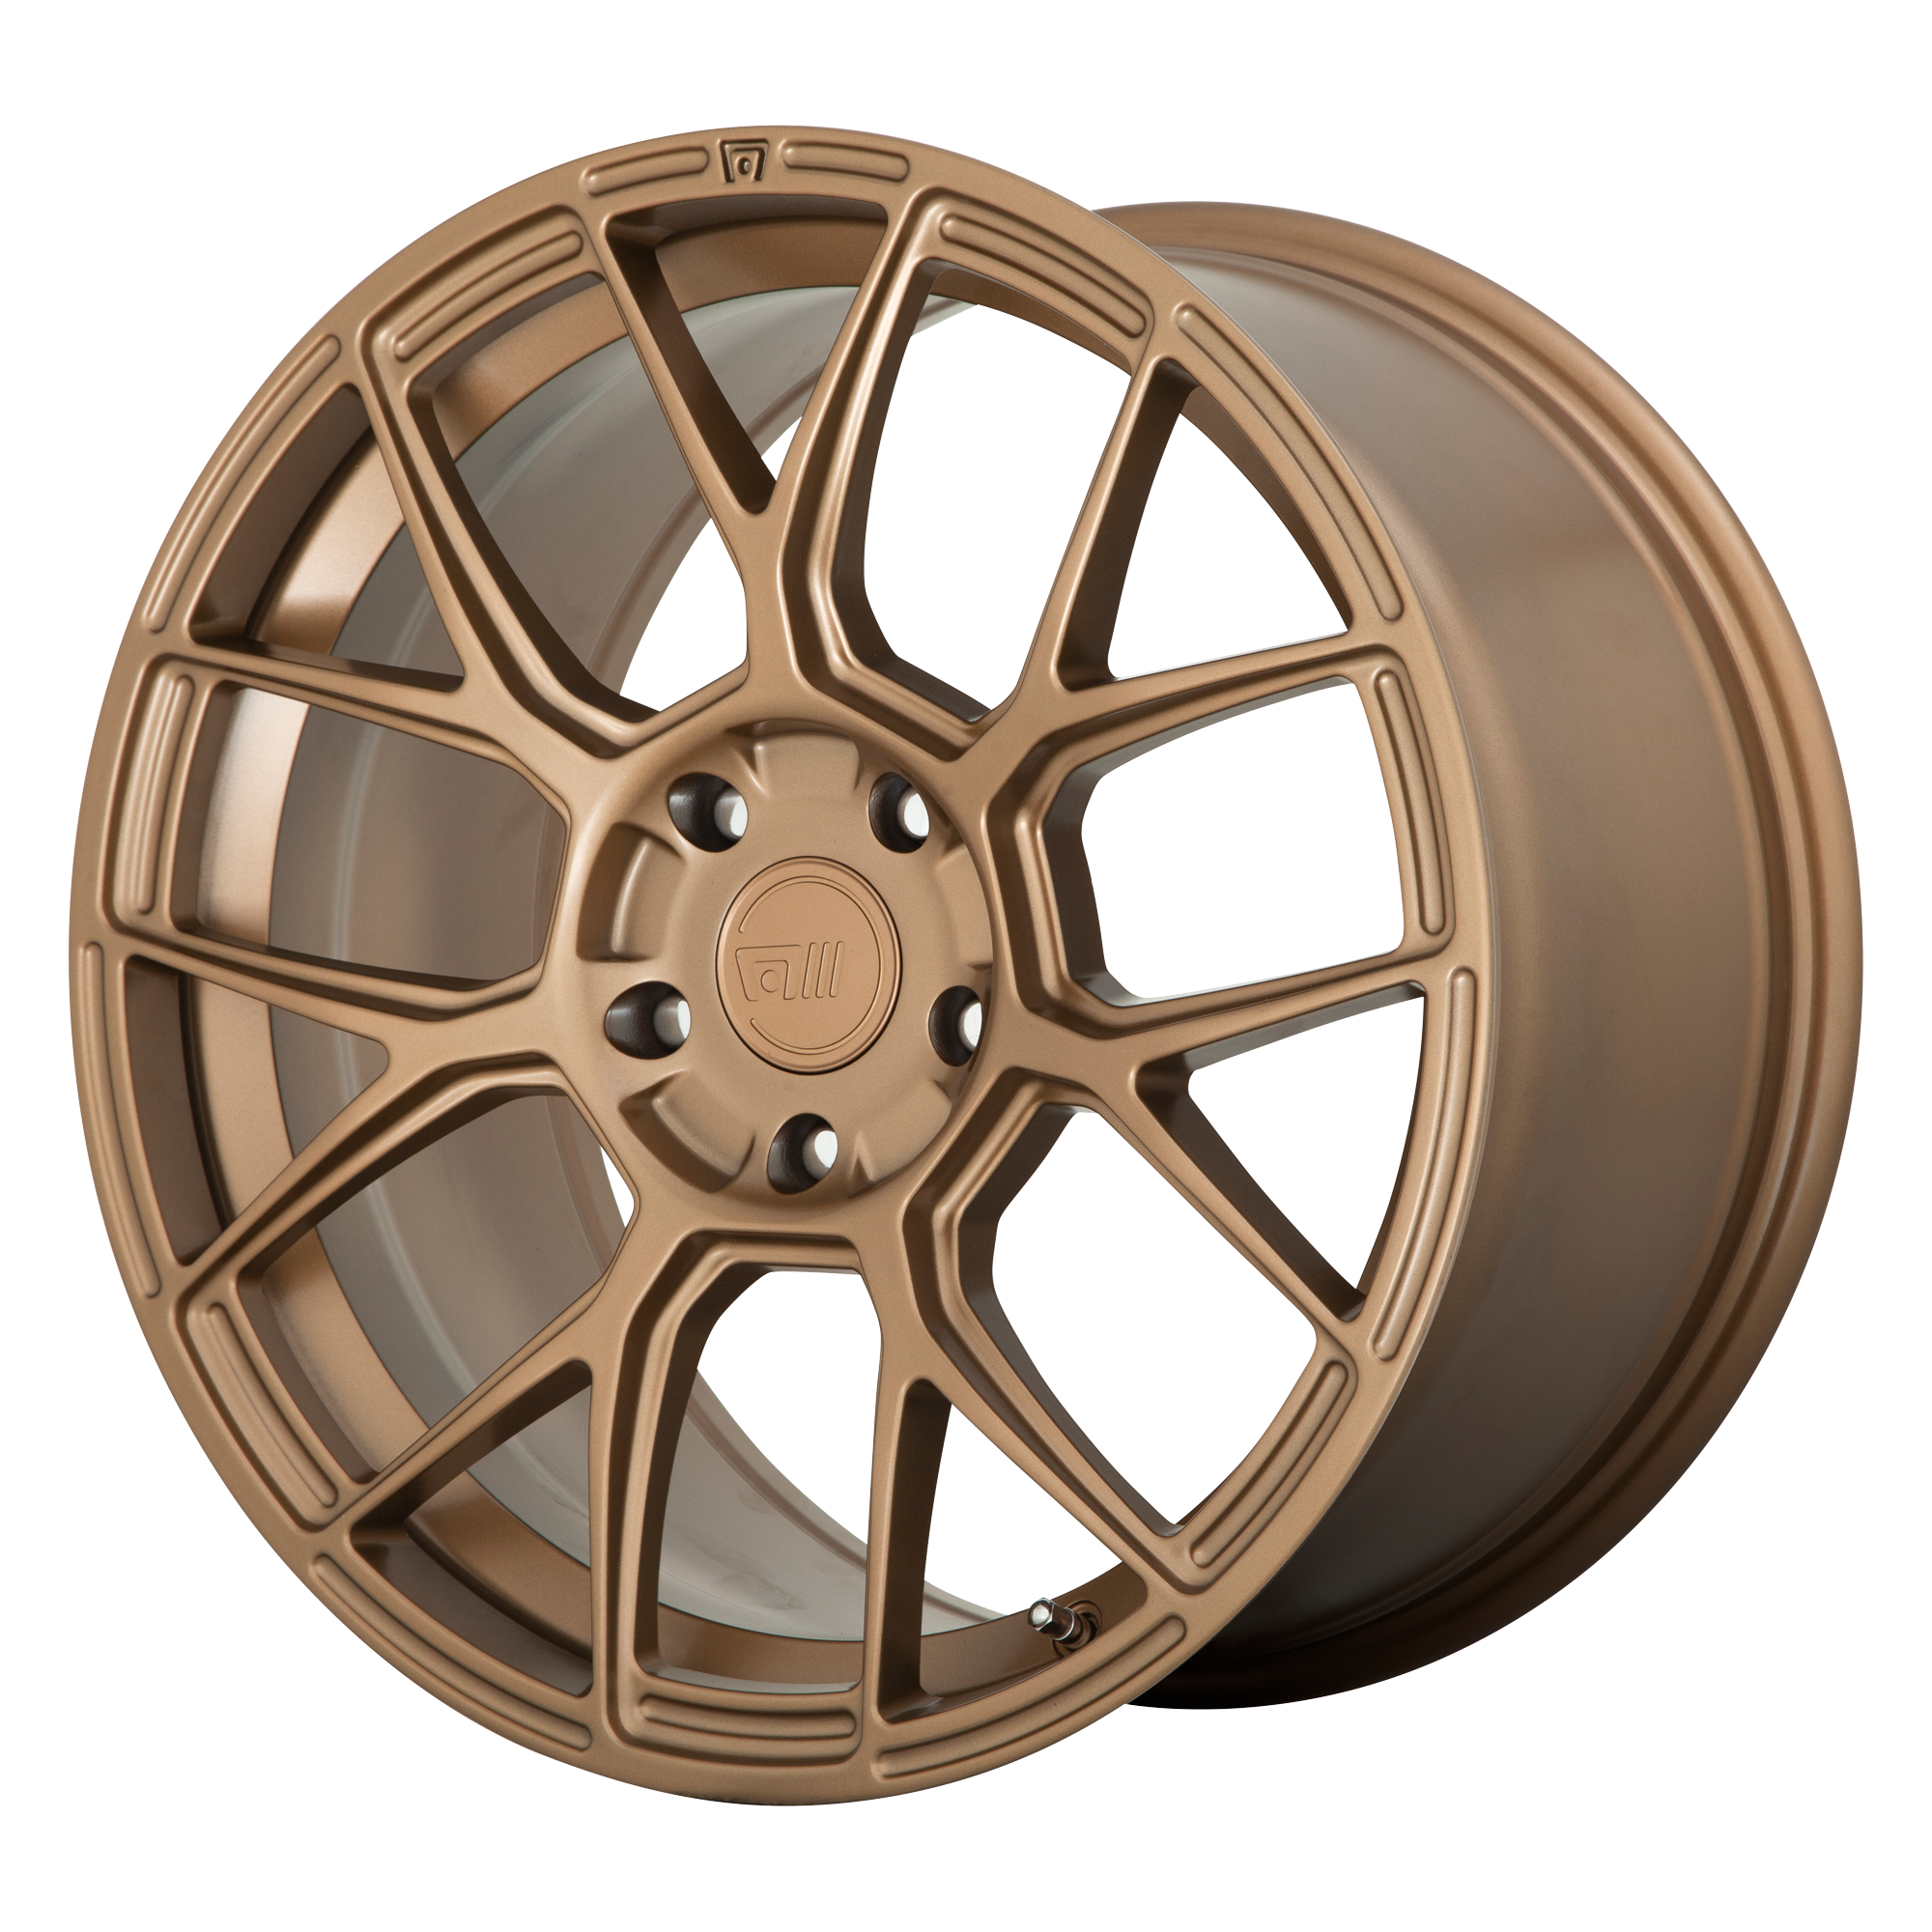 CM7 18x8.5 5x100.00 MATTE BRONZE (42 mm) - Tires and Engine Performance